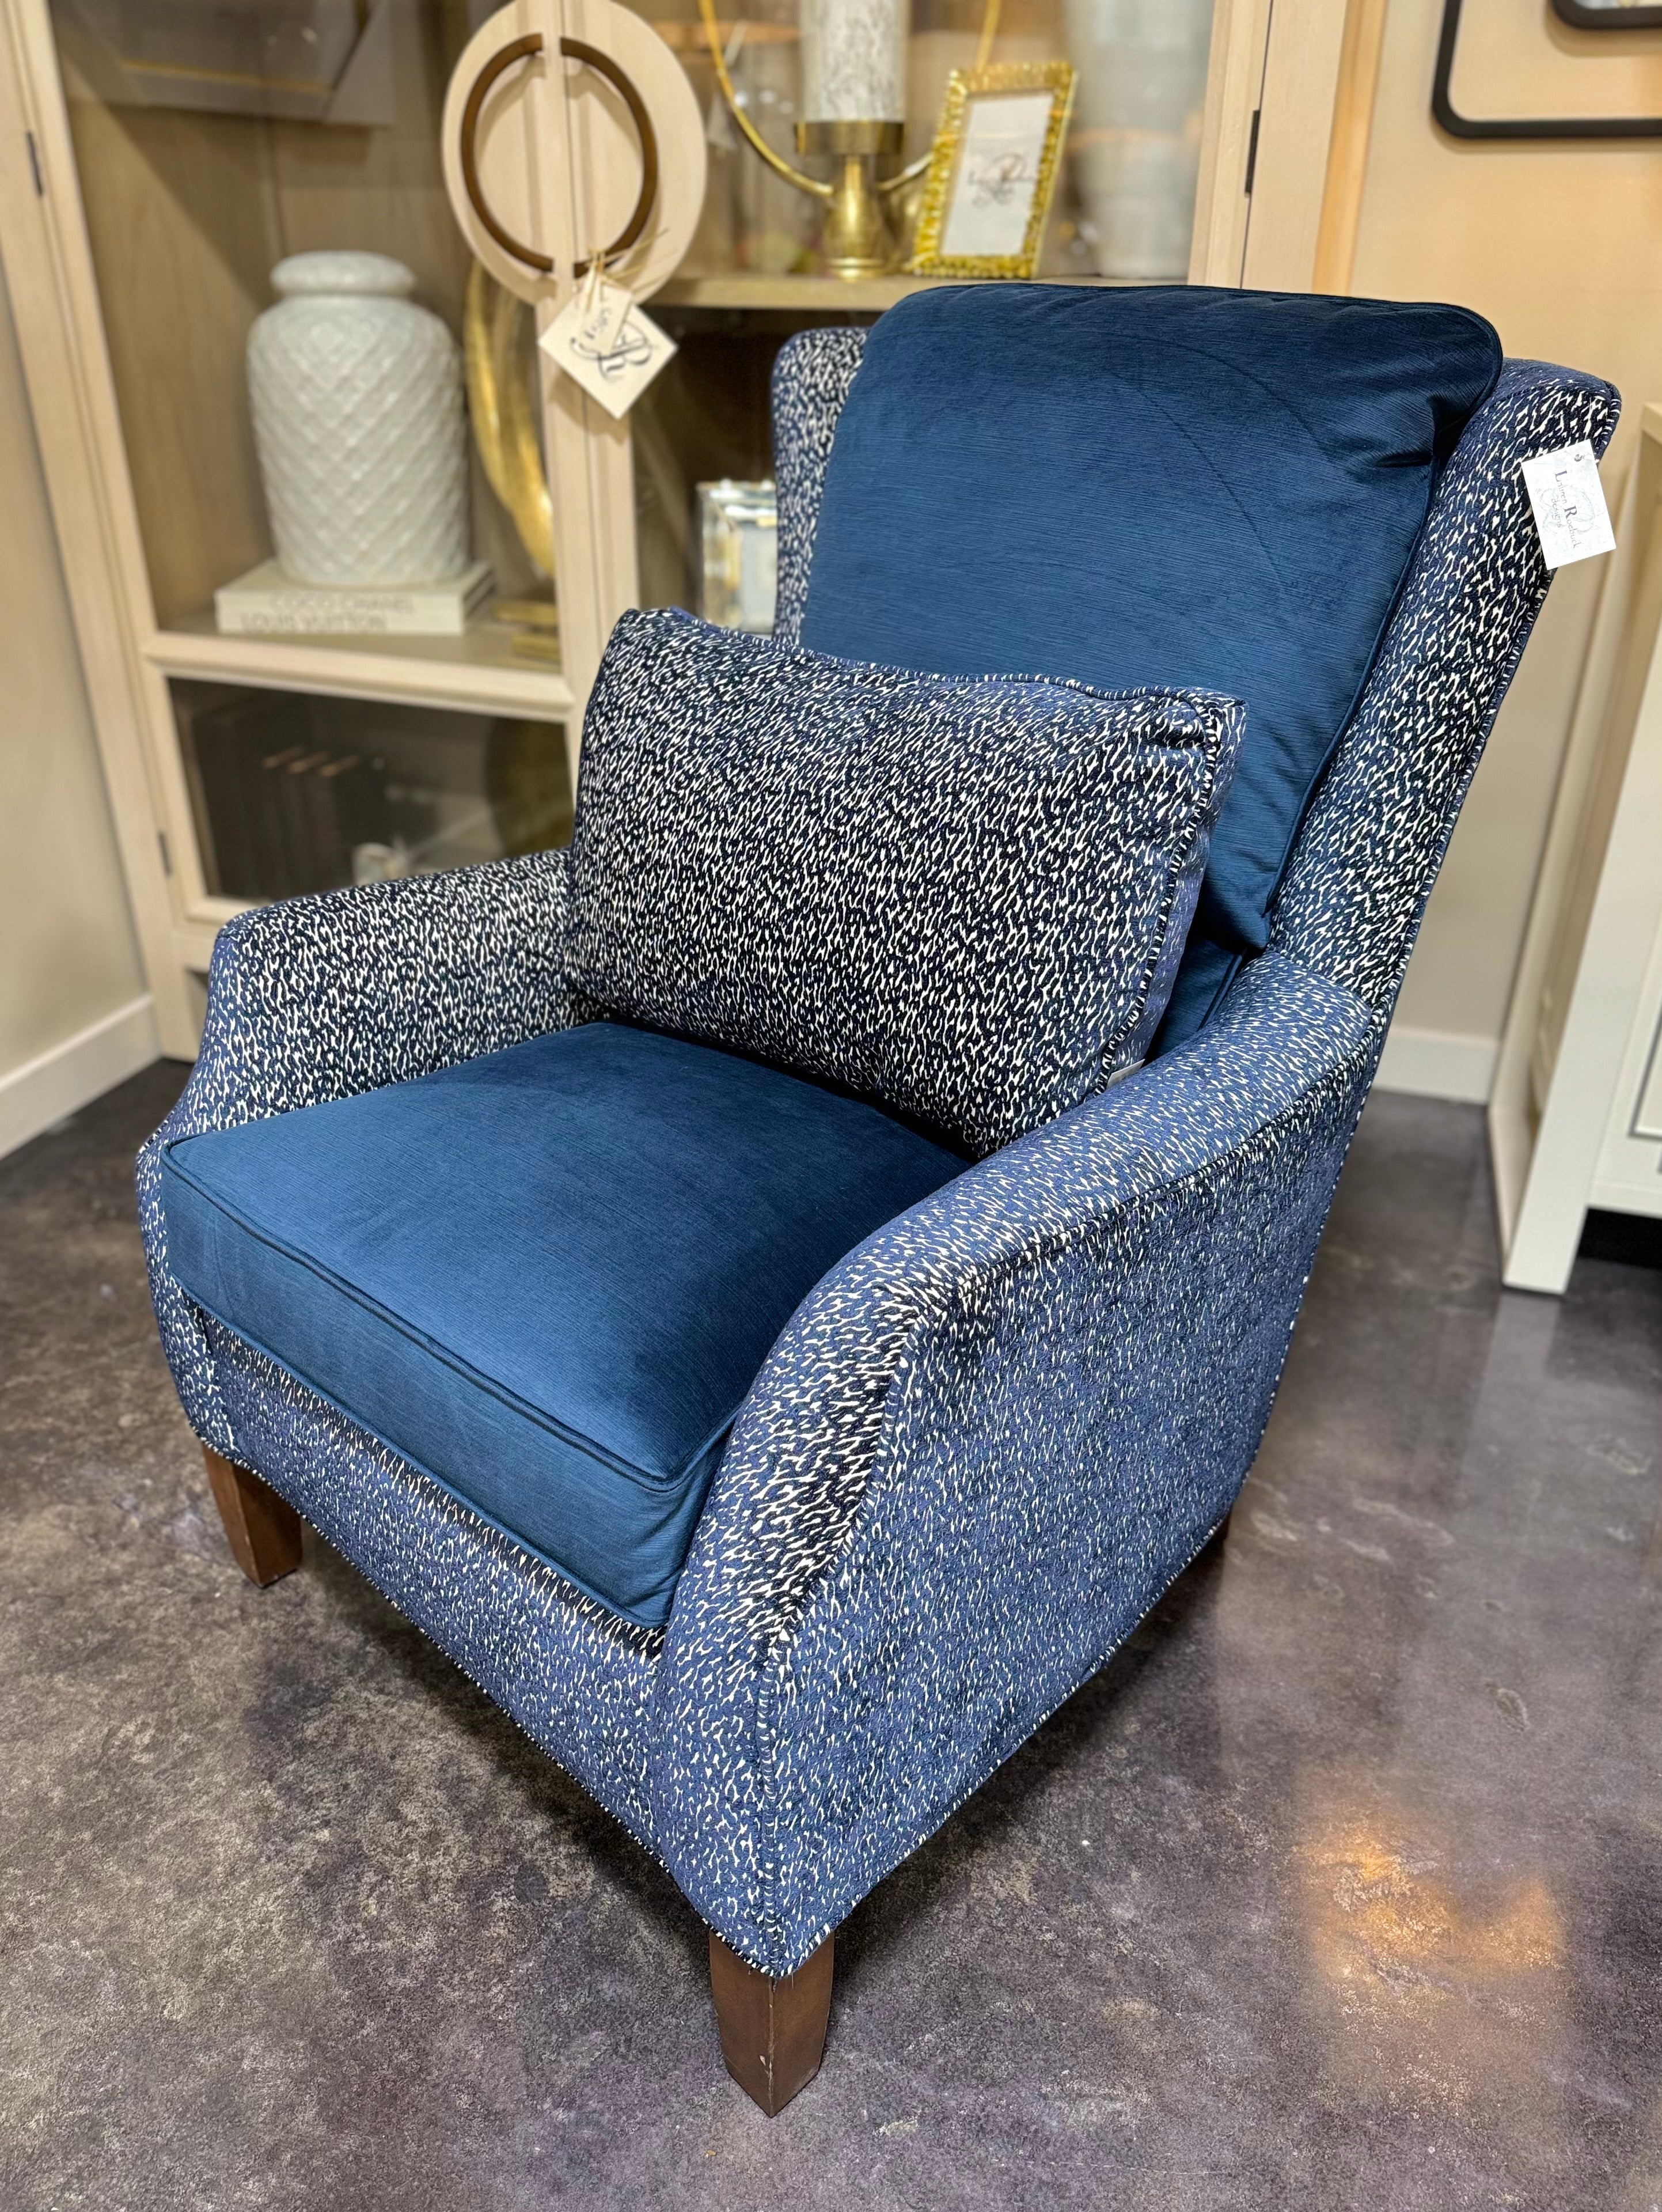 Solid Blue and Dotted Arm Chair